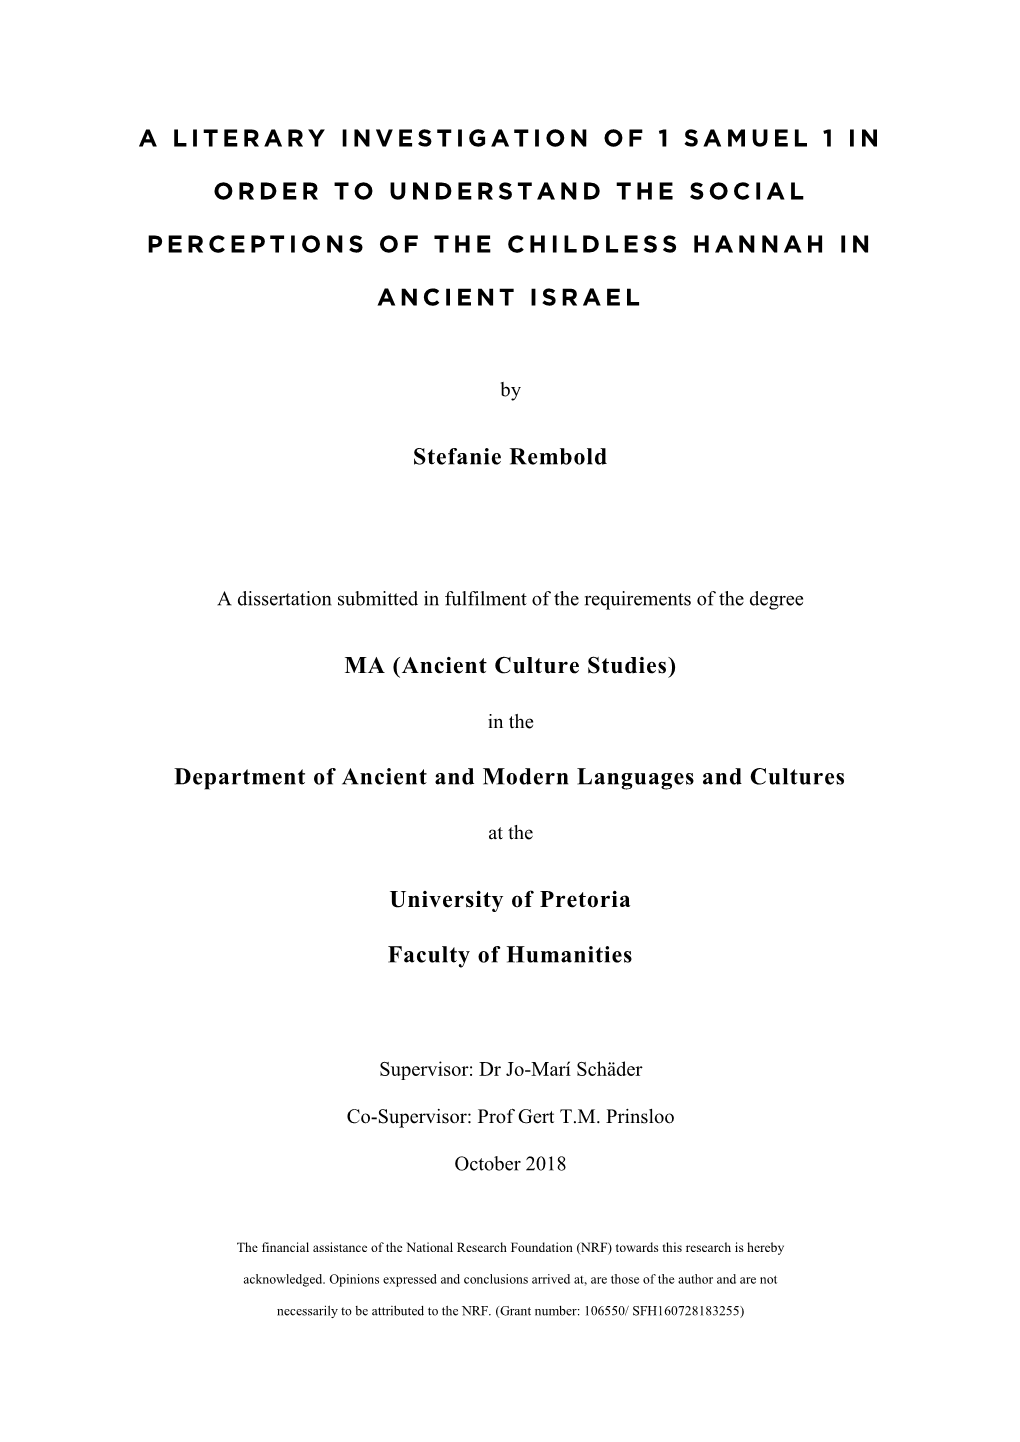 A Literary Investigation of 1 Samuel 1 in Order to Understand the Social Perceptions of the Childless Hannah in Ancient Israel